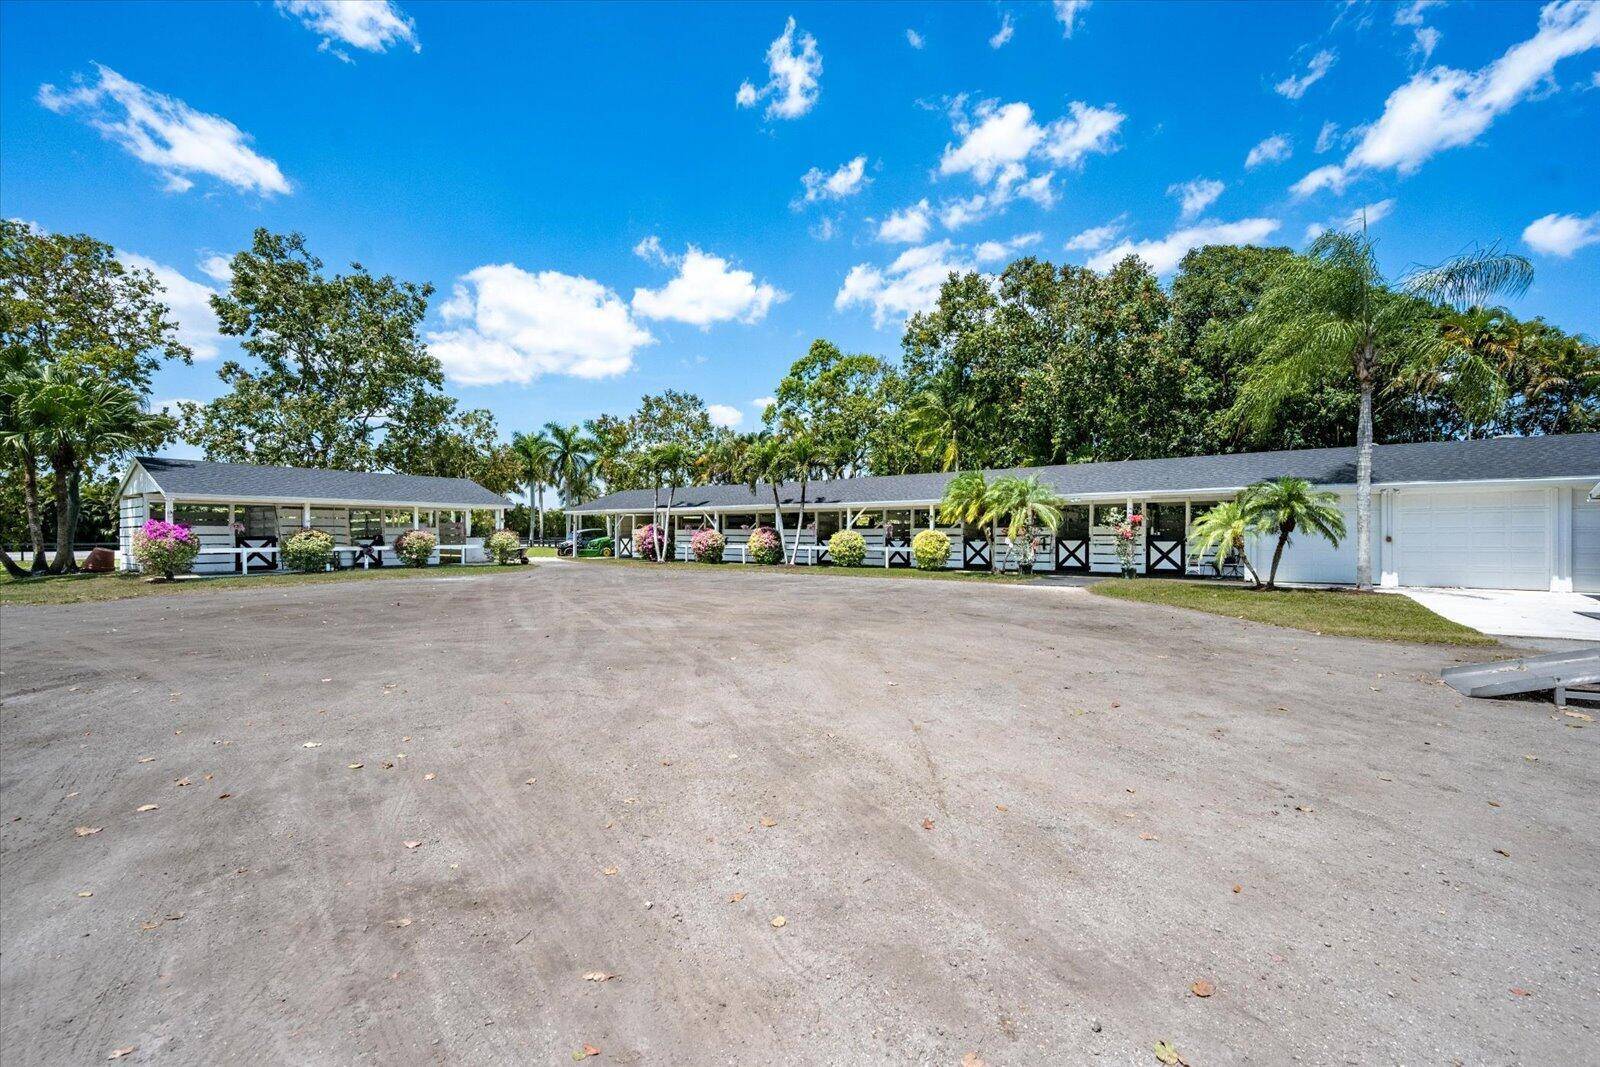 Beautiful 12 stall serene farm ; hacking distance to the horse show, with 12 stalls available.